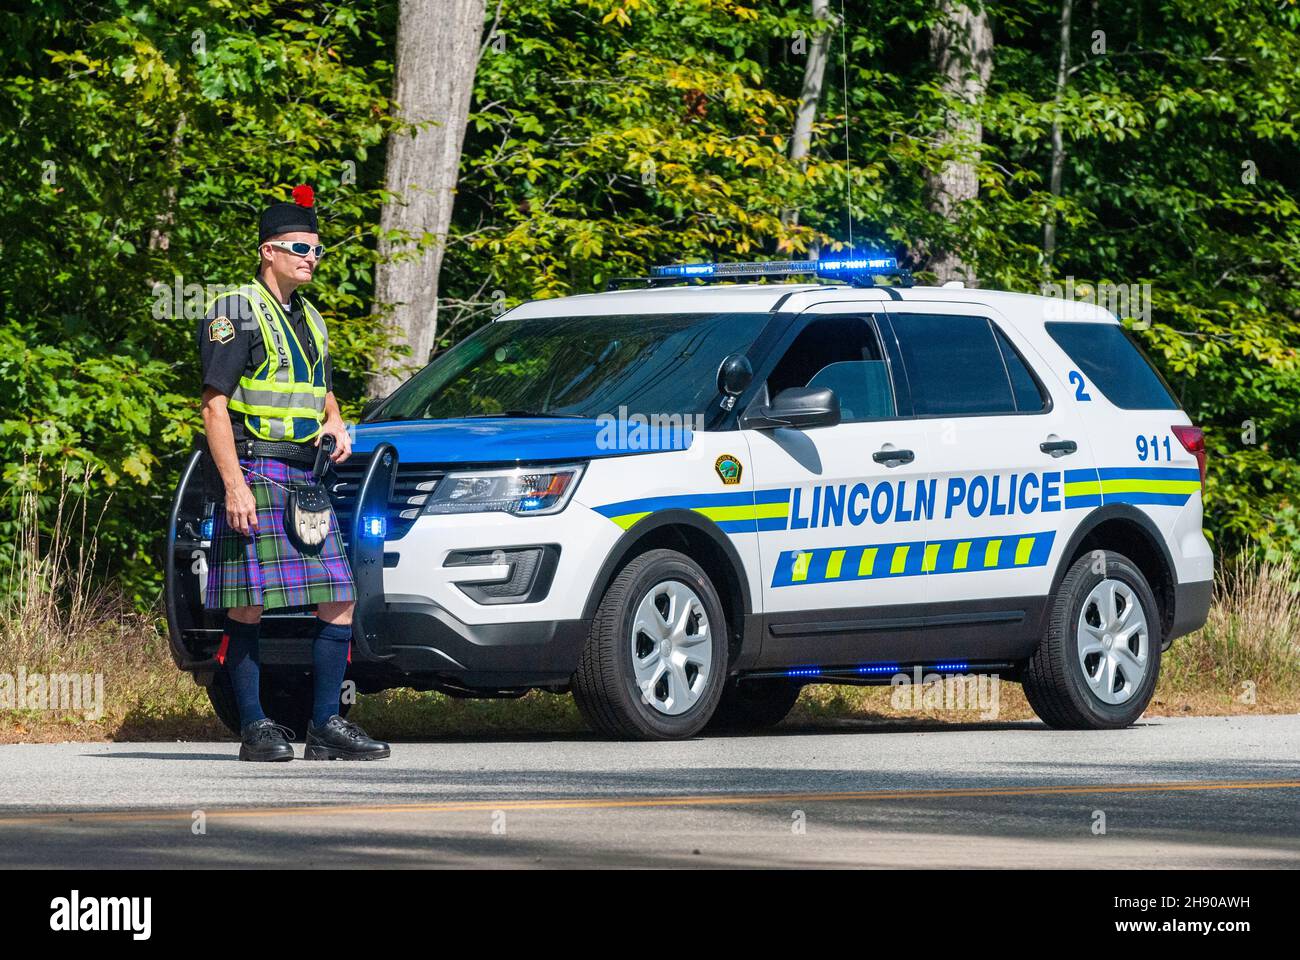 Lincoln, New Hampshire, United States of America – September 17, 2016. Police officer wearing a Scottish kilt, by a patrol car in Lincoln, NH. Stock Photo